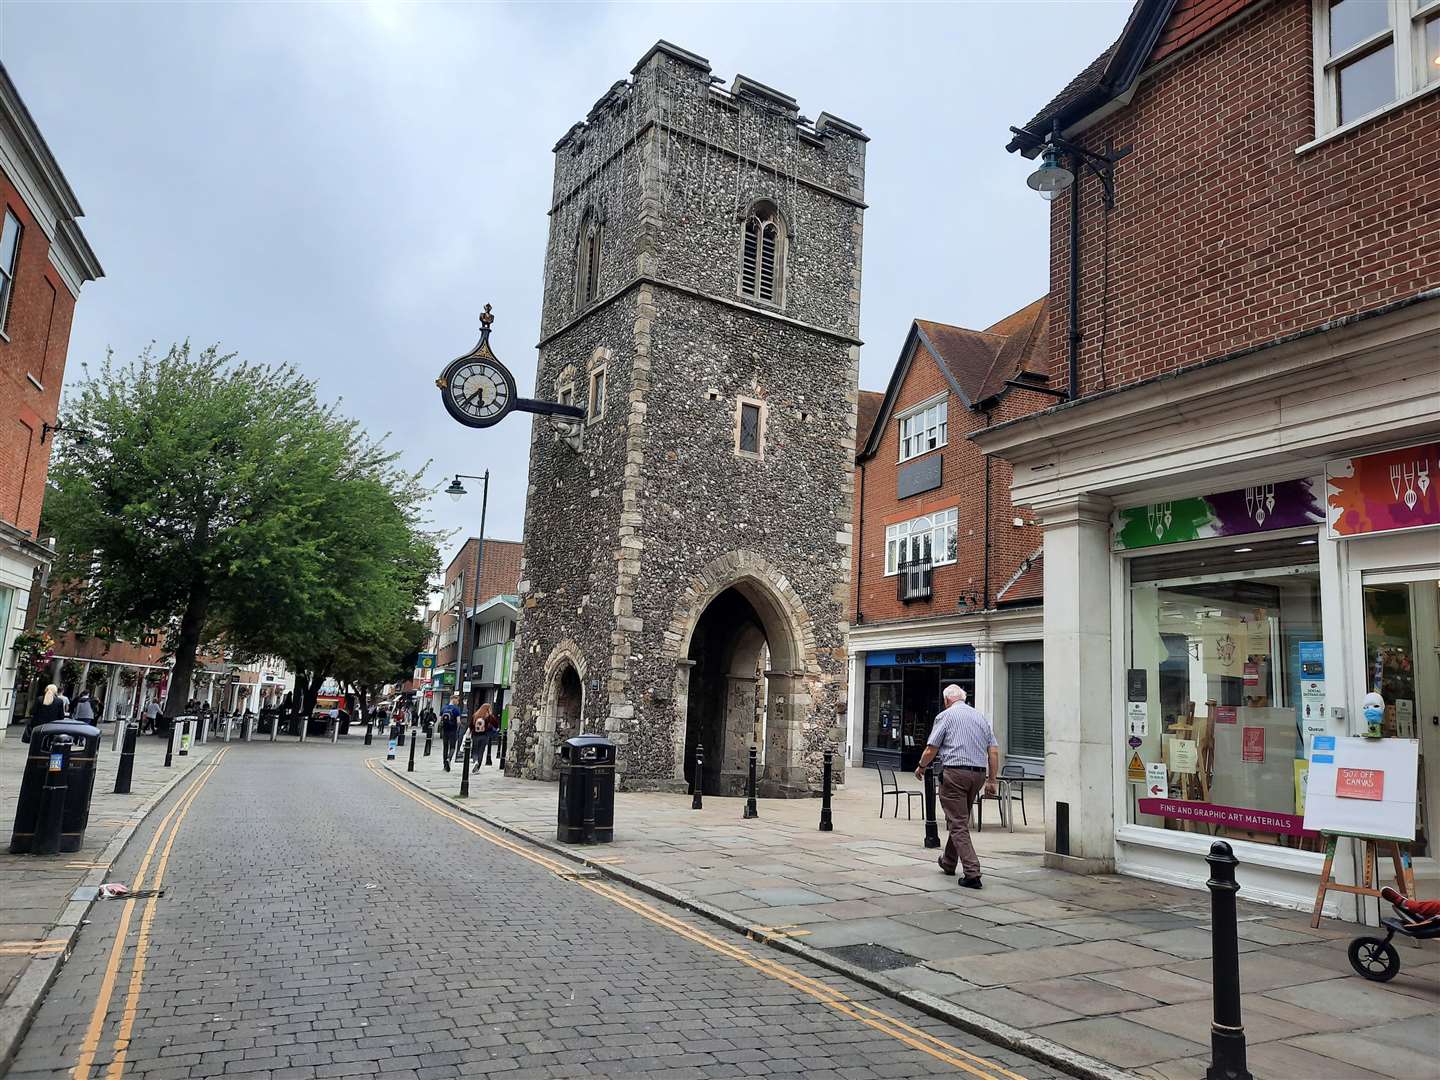 The attacks took place in St George's Street, Canterbury